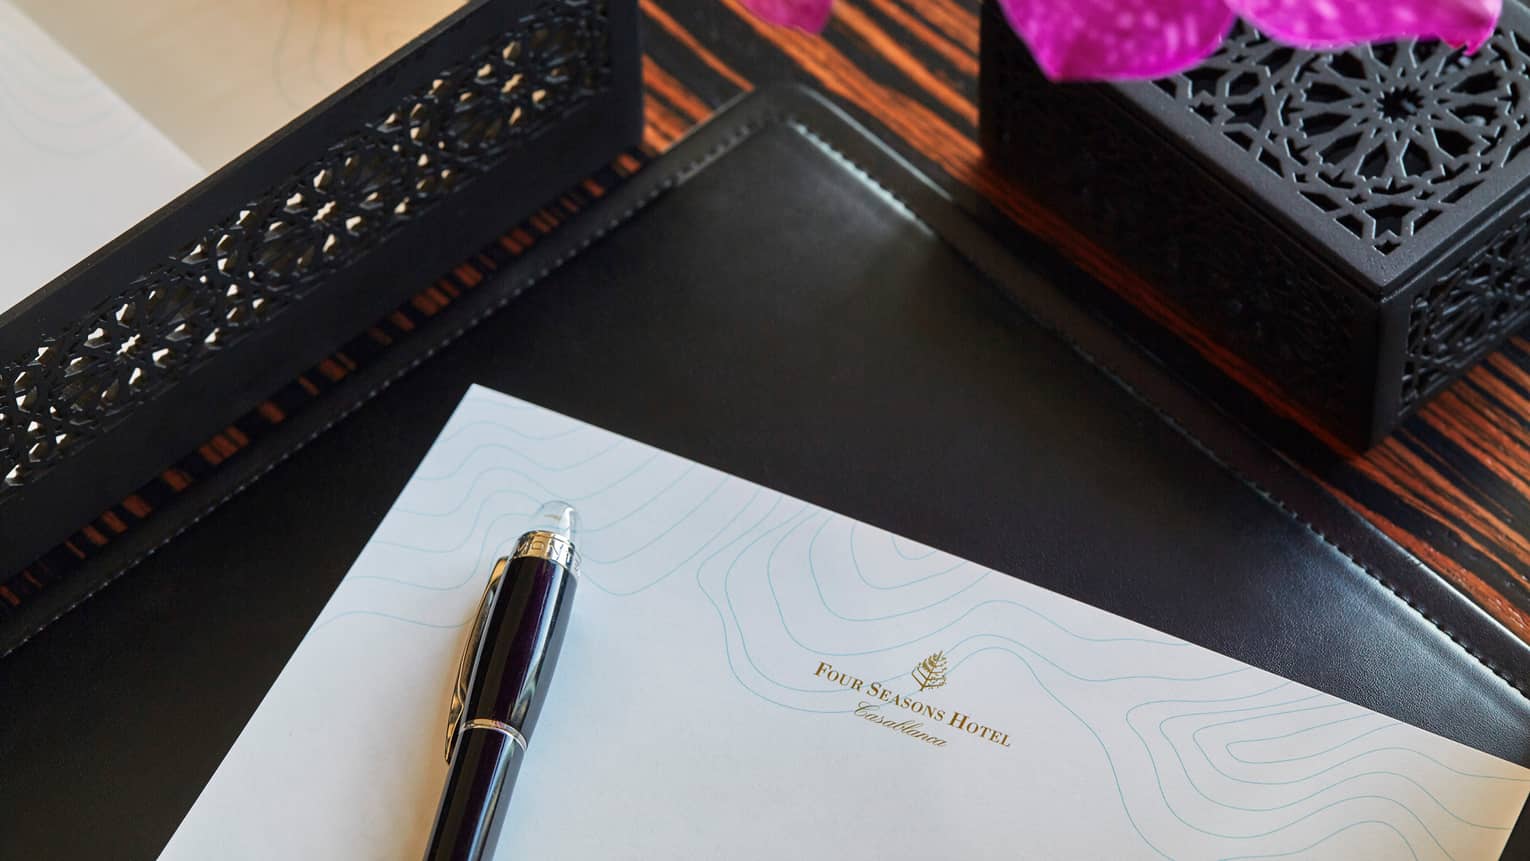 Corner of white piece of paper with Four Seasons logo, pen